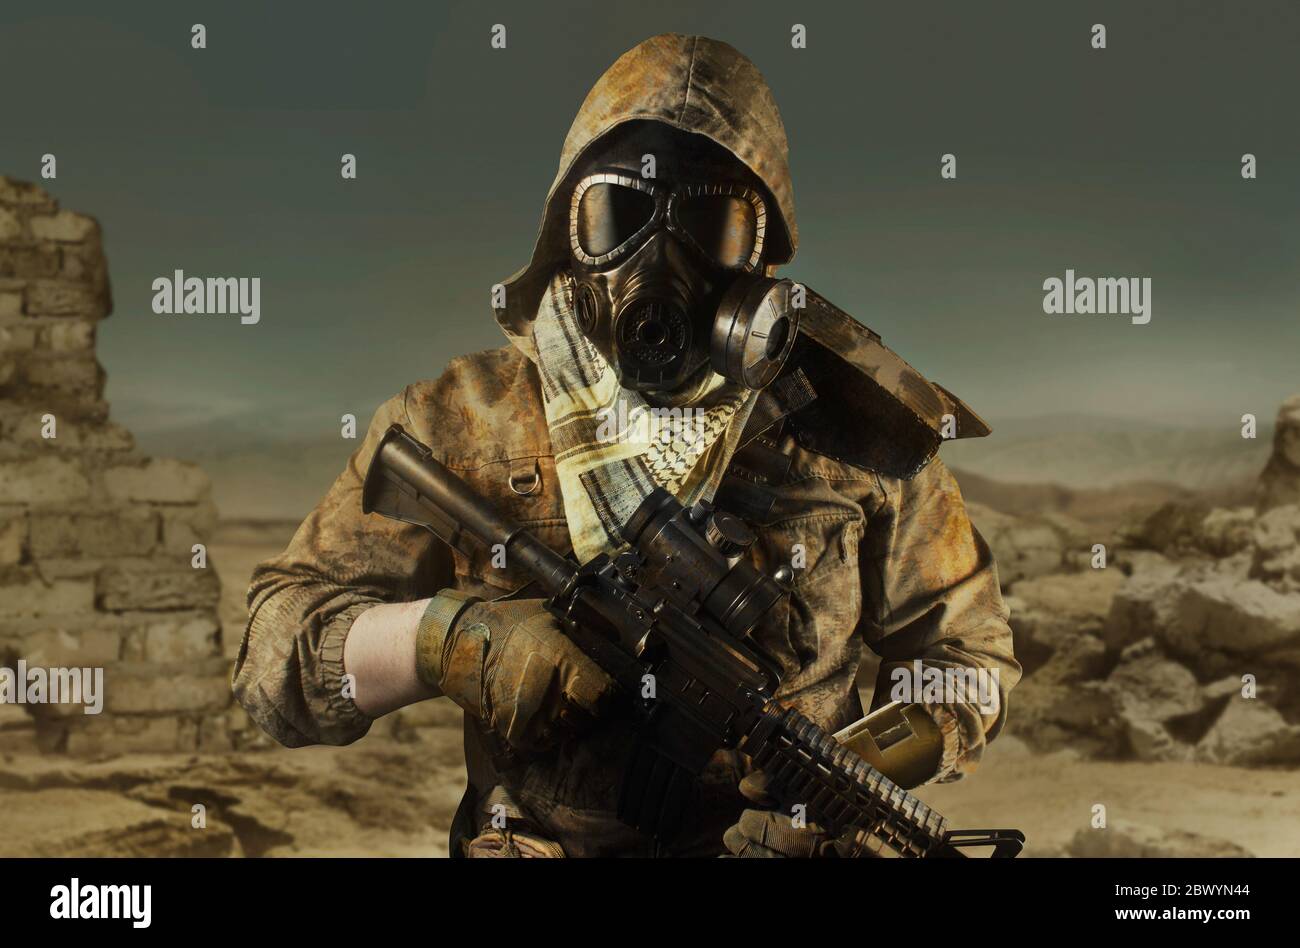 Photo of a desert post-apocalyptic soldier in tactical jacket, gas mask, gloves, rifle and armor on wasteland background front view. Stock Photo